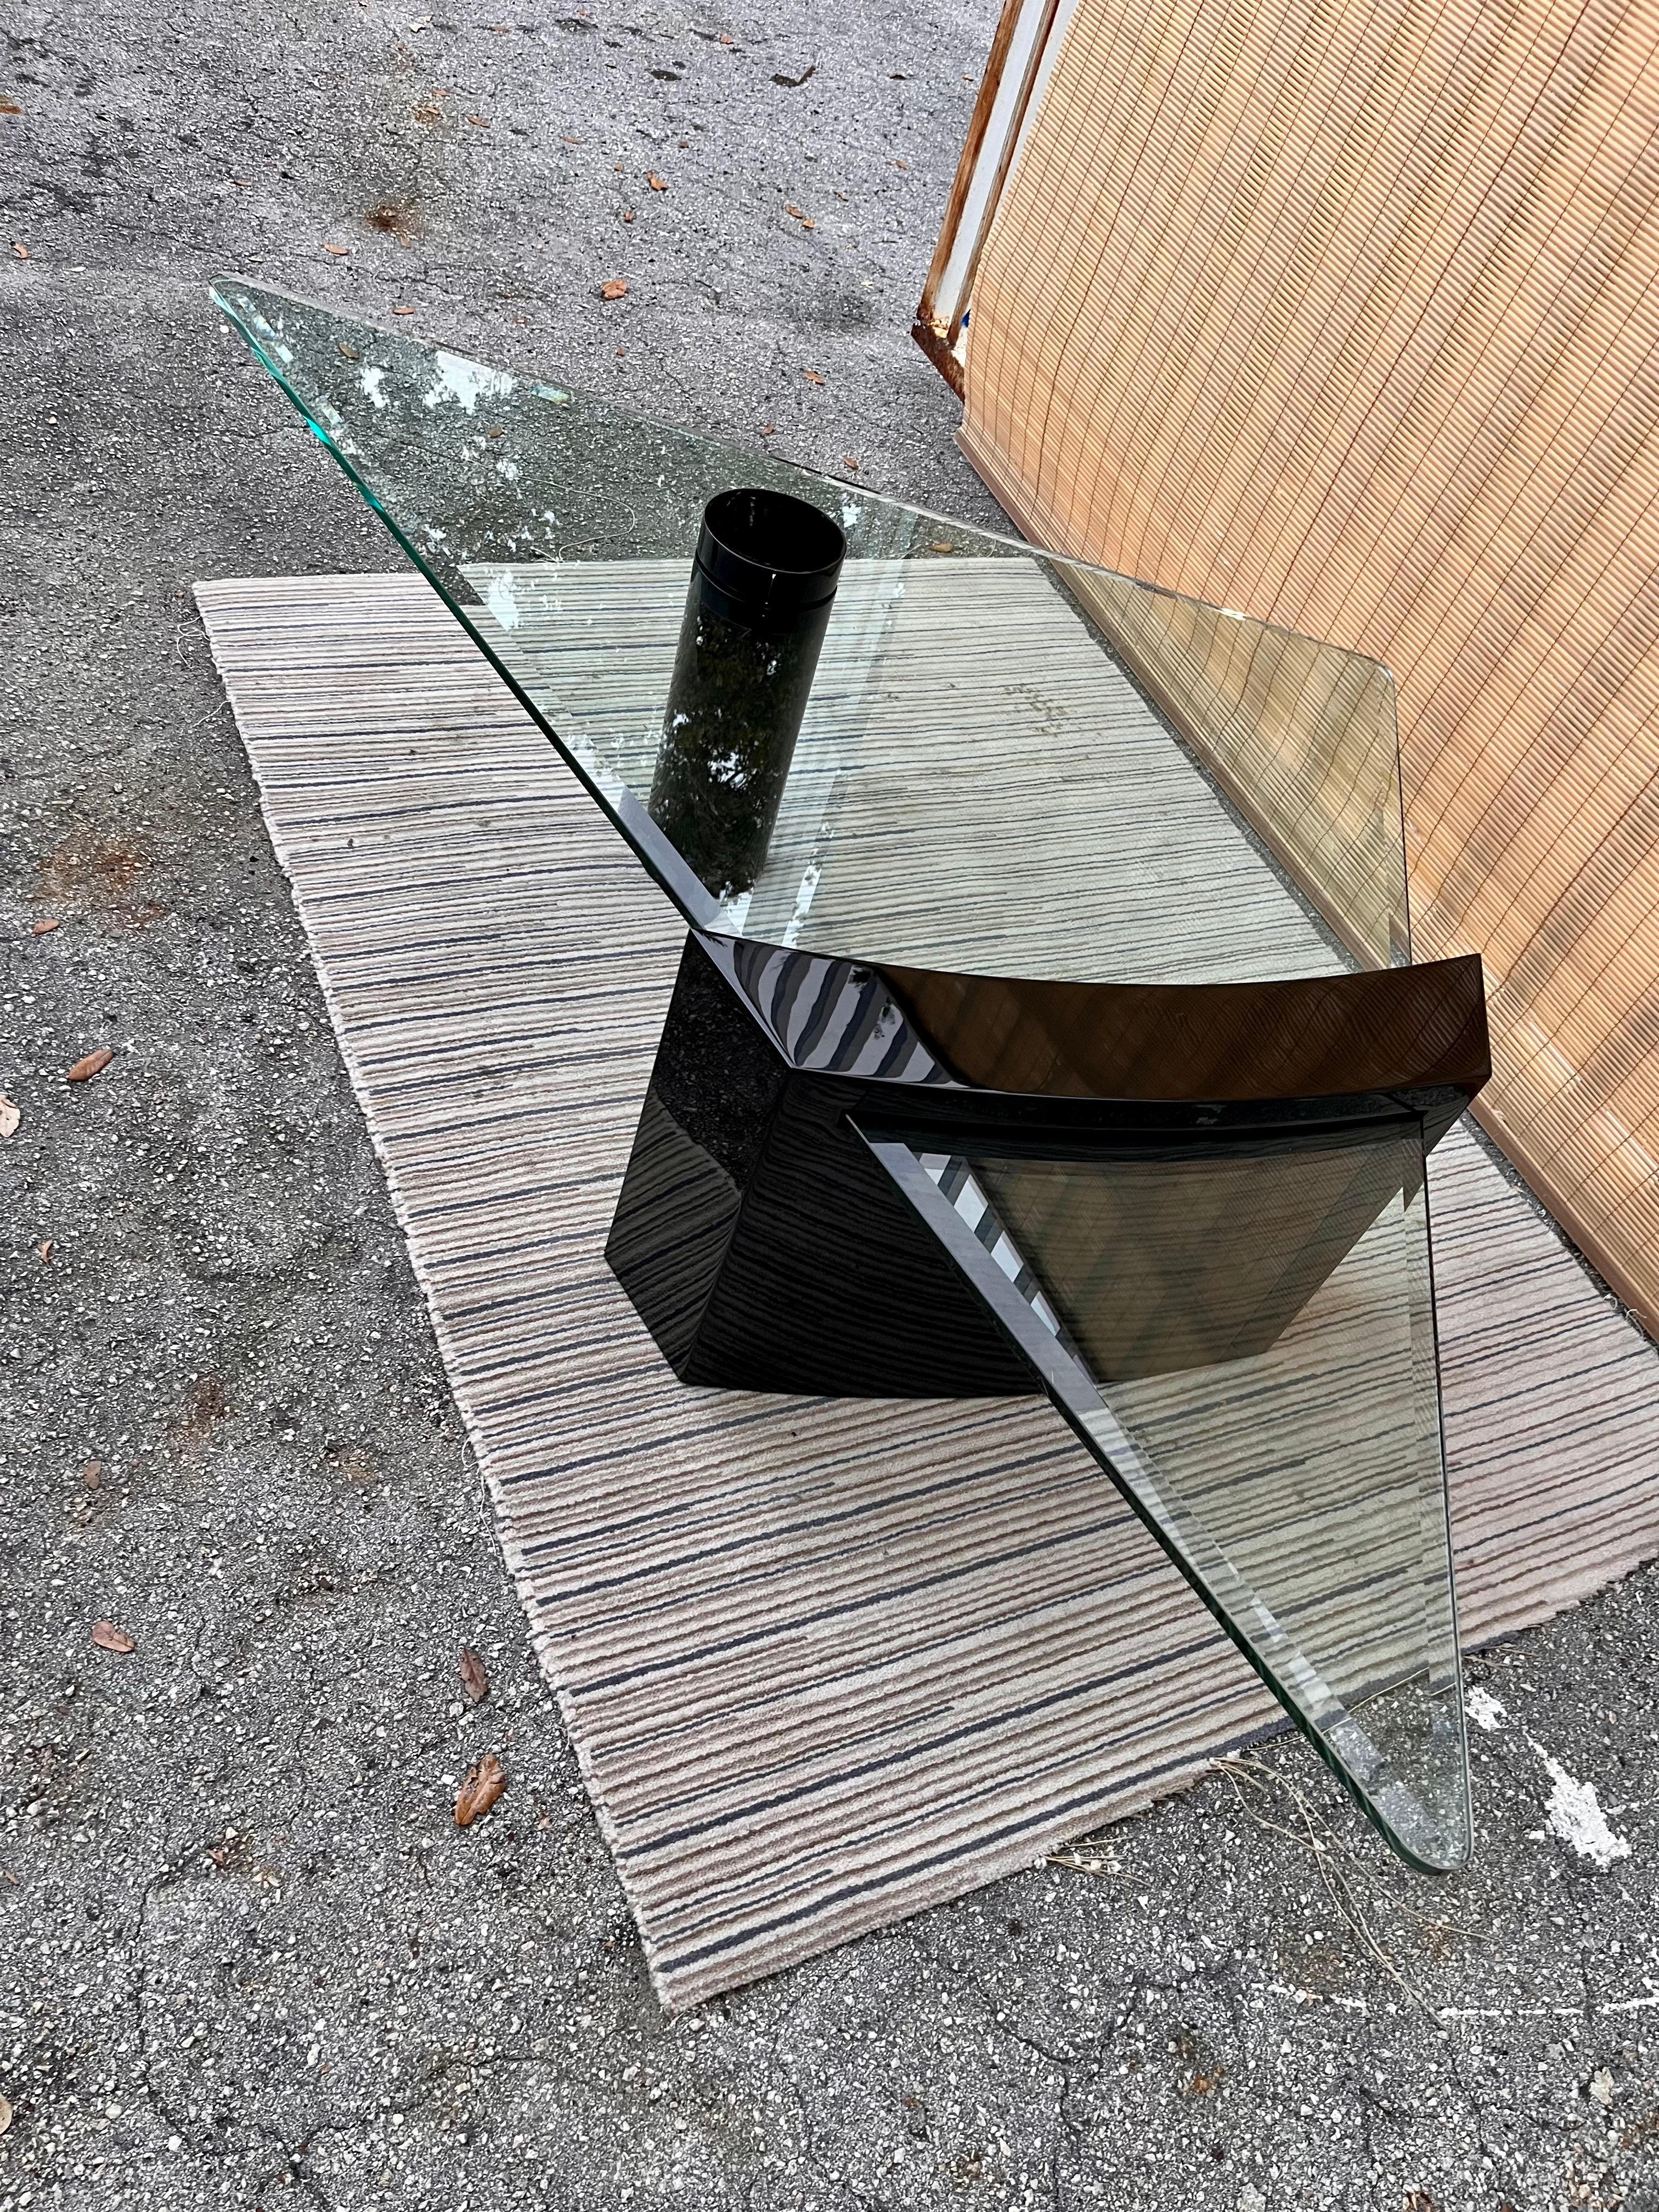 Beveled 1980s, Post Modern Black Lacquer Coffee Table in the Roger Rougier Style For Sale